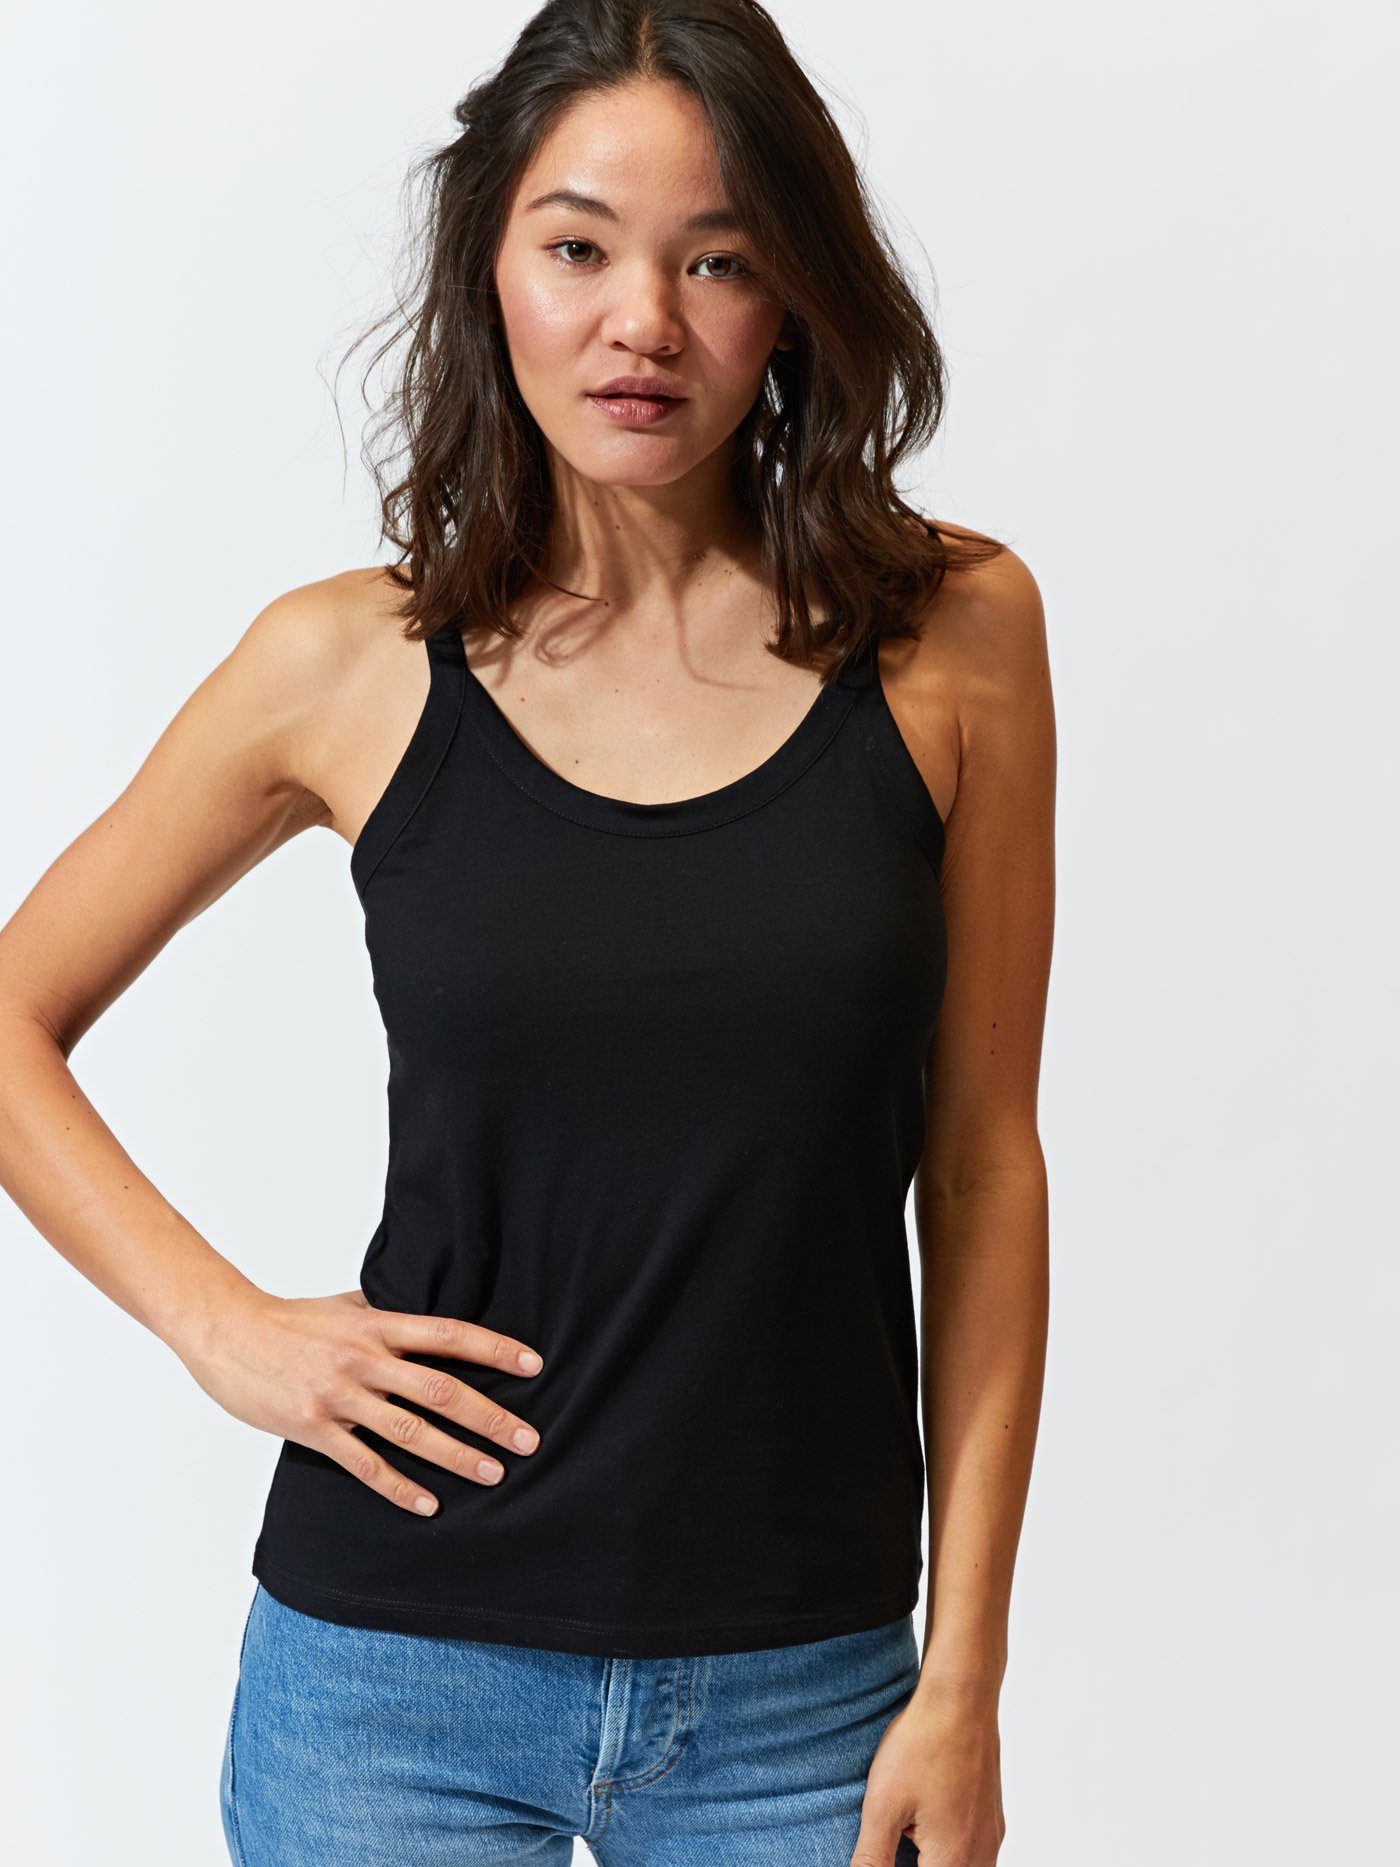 Women'S Invincible Cami Tank in Heather Grey – Threads 4 Thought